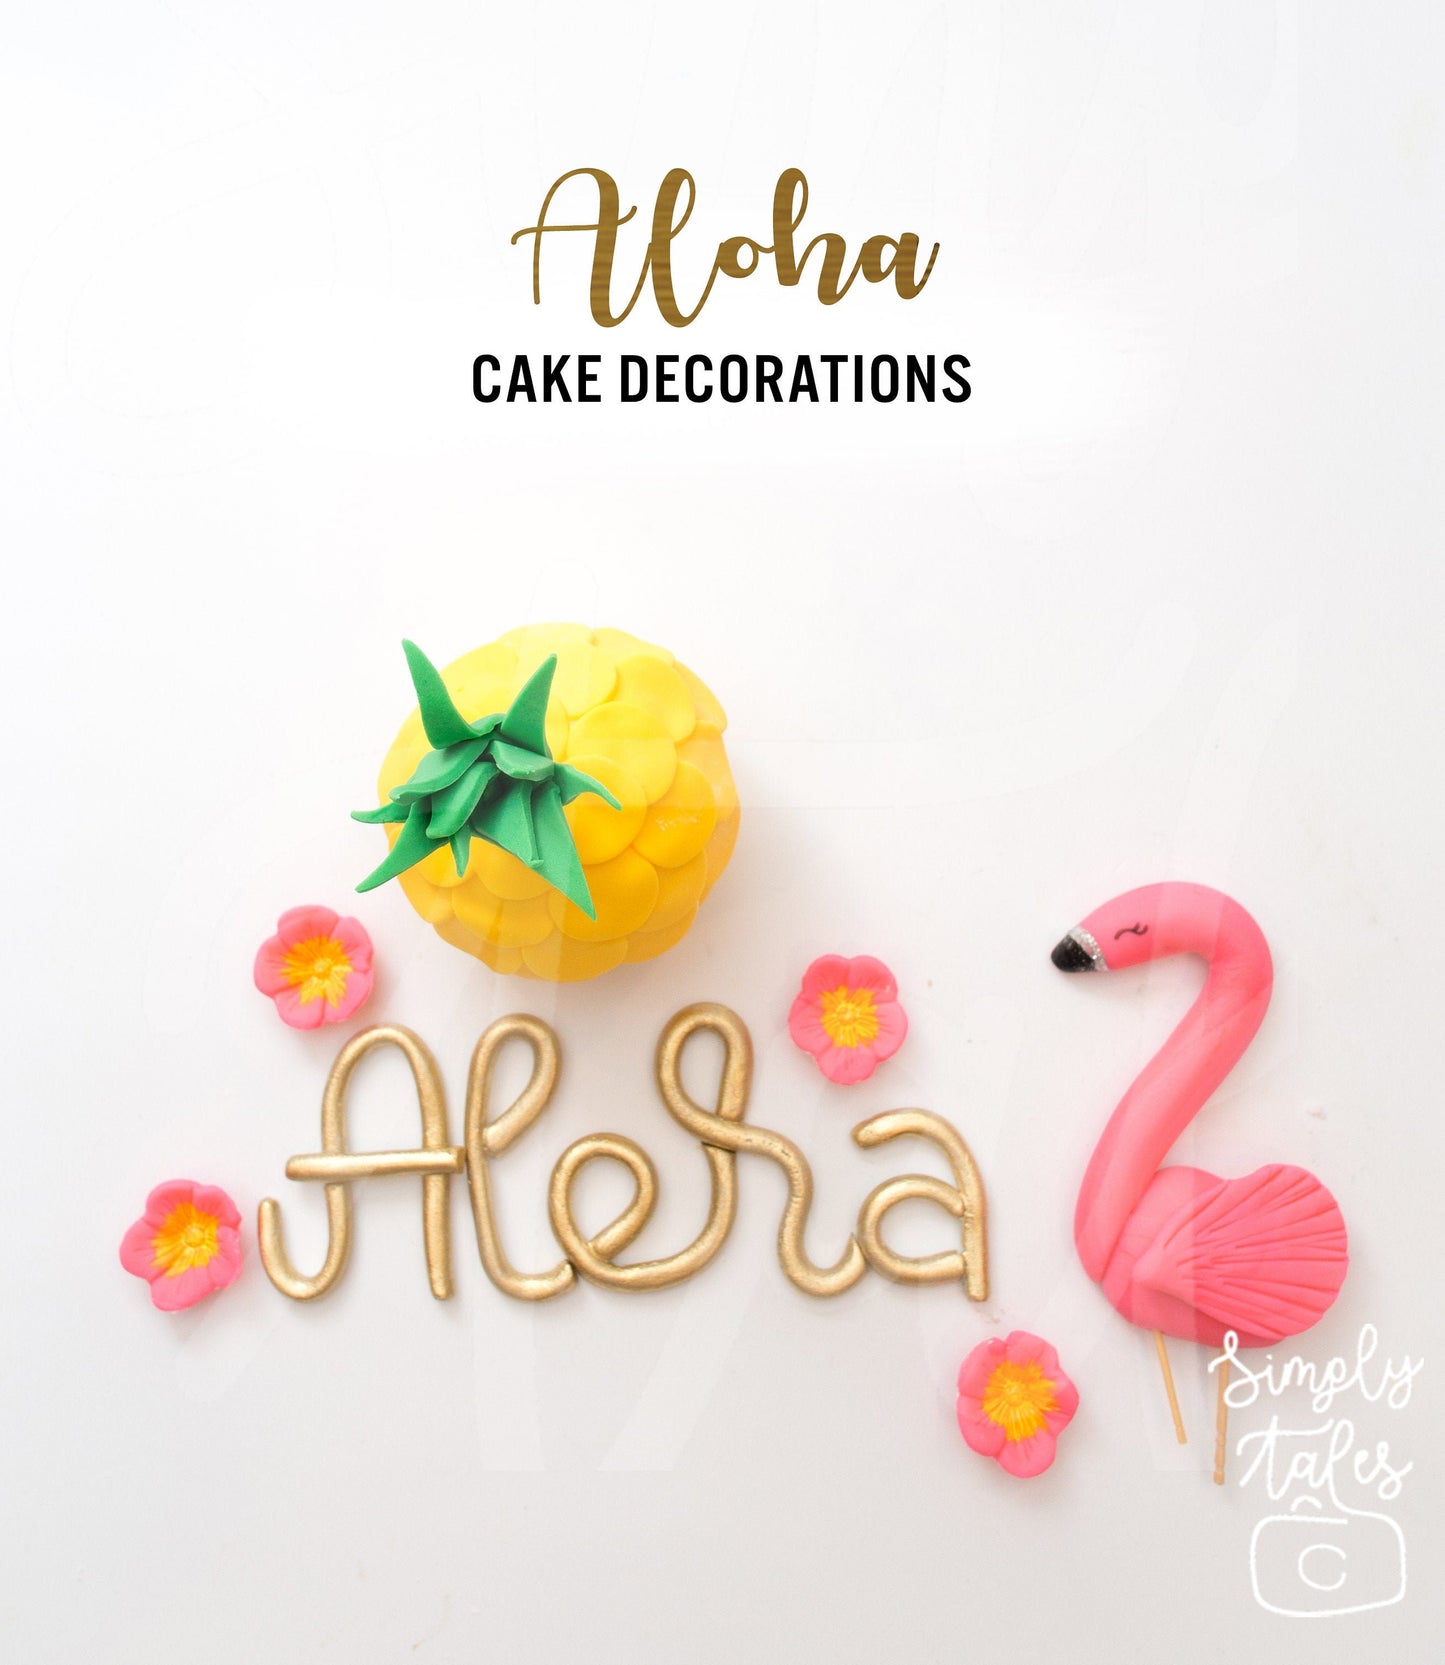 1 set Flamingo Fiesta cake and cupcake toppers, Tropical party, Summer celebration, edible cake decorations, Cinco de Mayo, Monstera